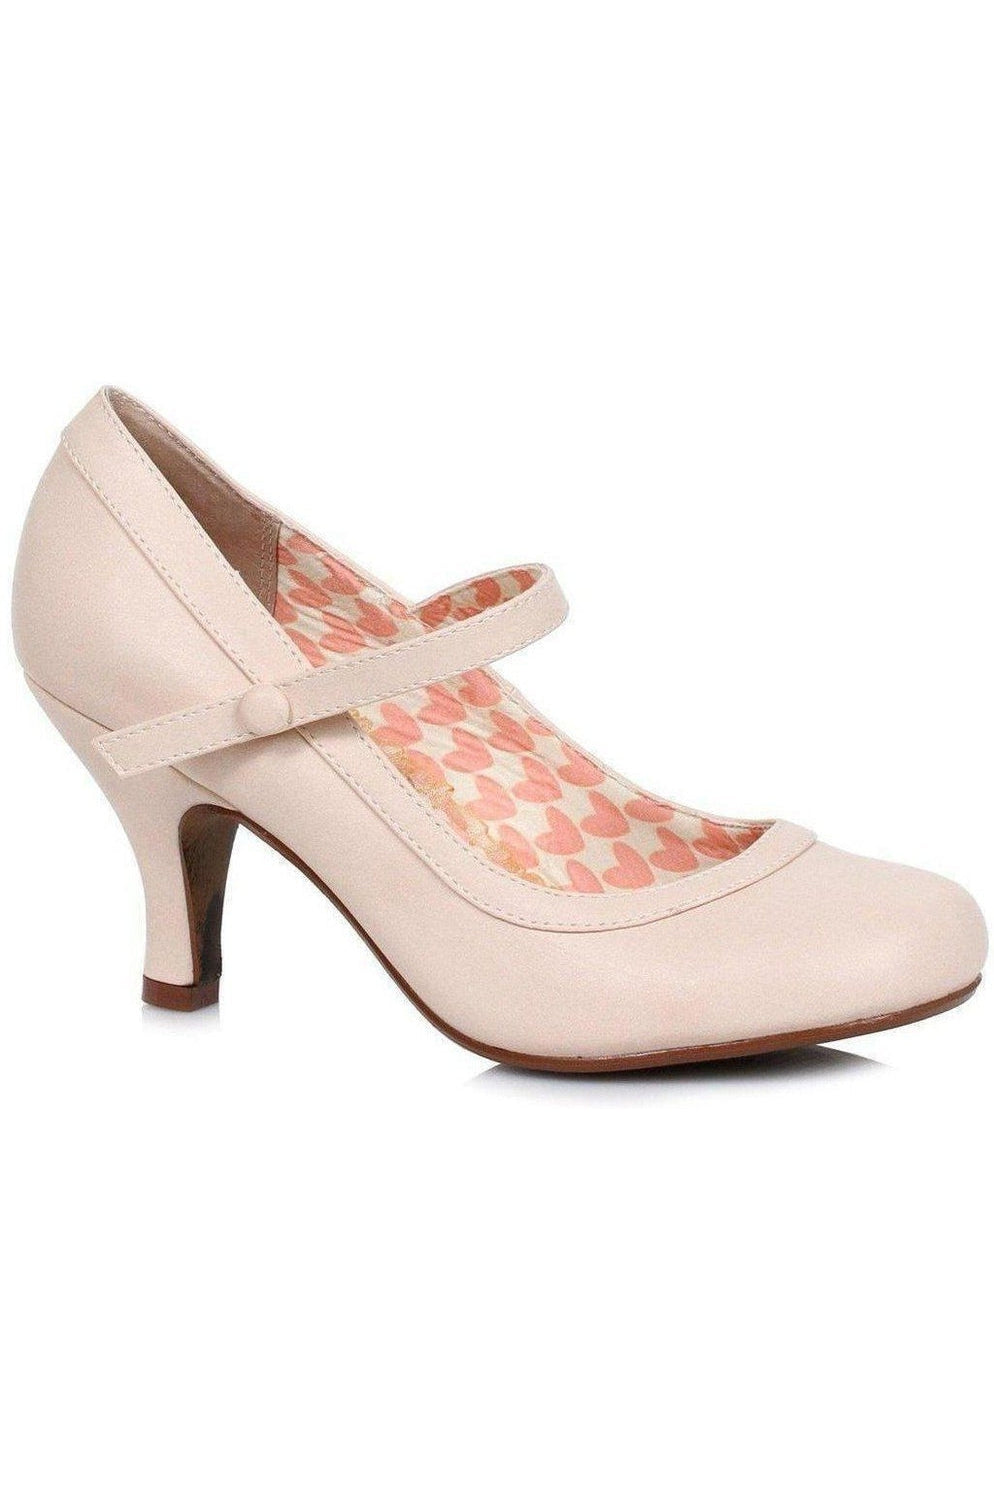 BP320-BETTIE Pump | Nude Faux Leather-Bettie Page by Ellie-SEXYSHOES.COM